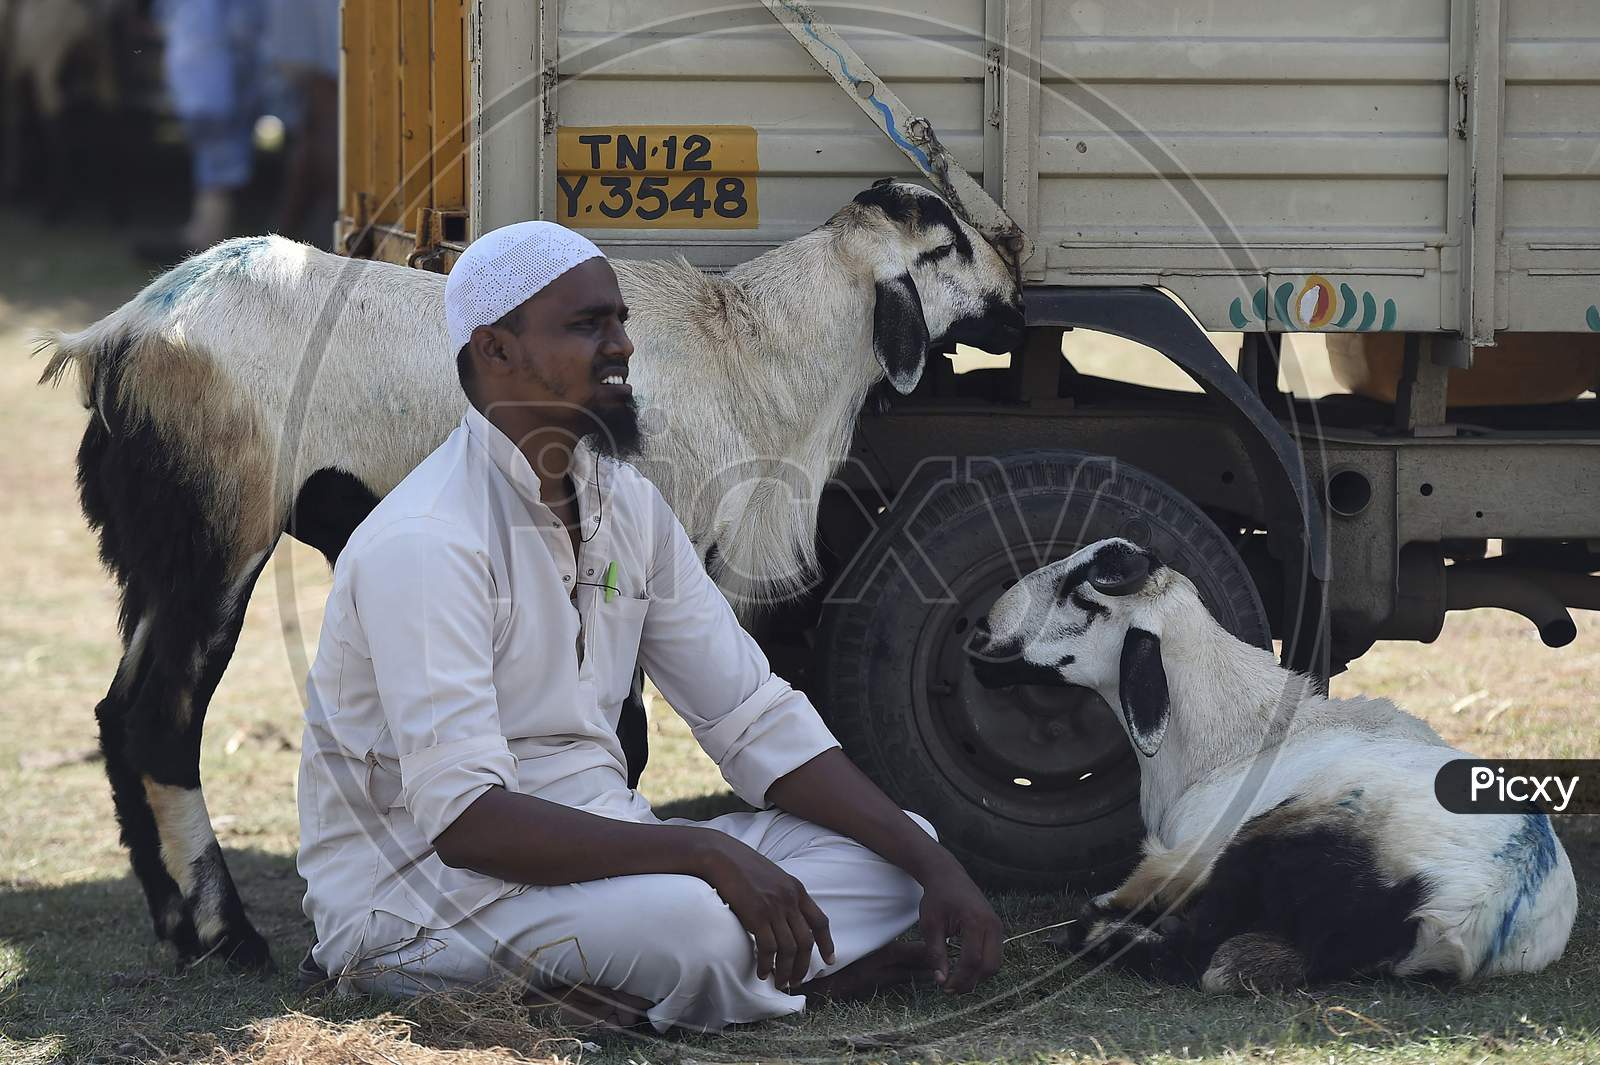 A Buyer Selects His Sacrificial Animal At A Livestock Market Ahead Of Eid Al- Adha, July 31, 2020 In Chennai